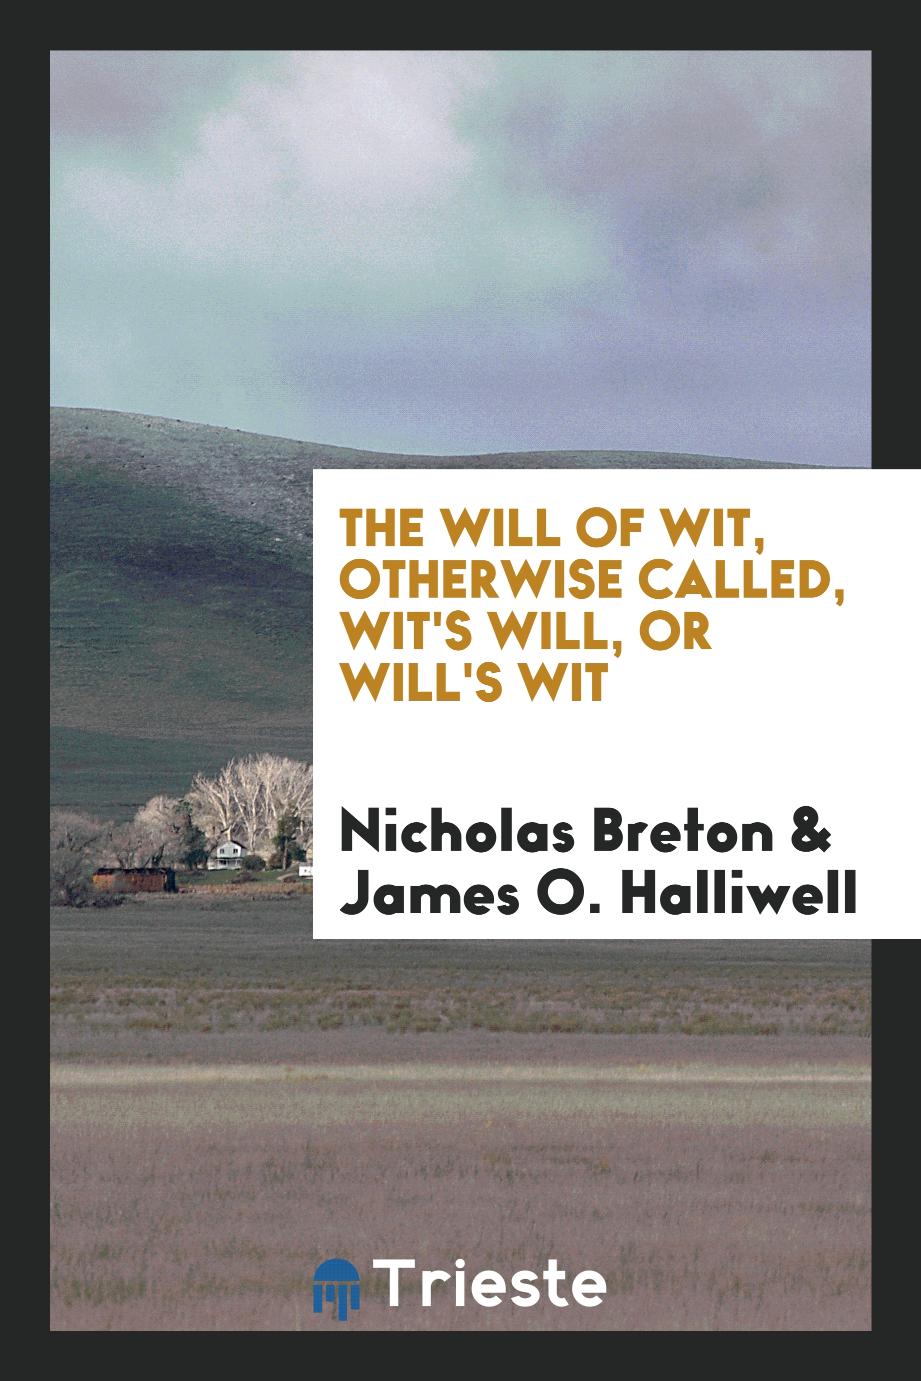 The Will of Wit, Otherwise Called, Wit's Will, or Will's Wit